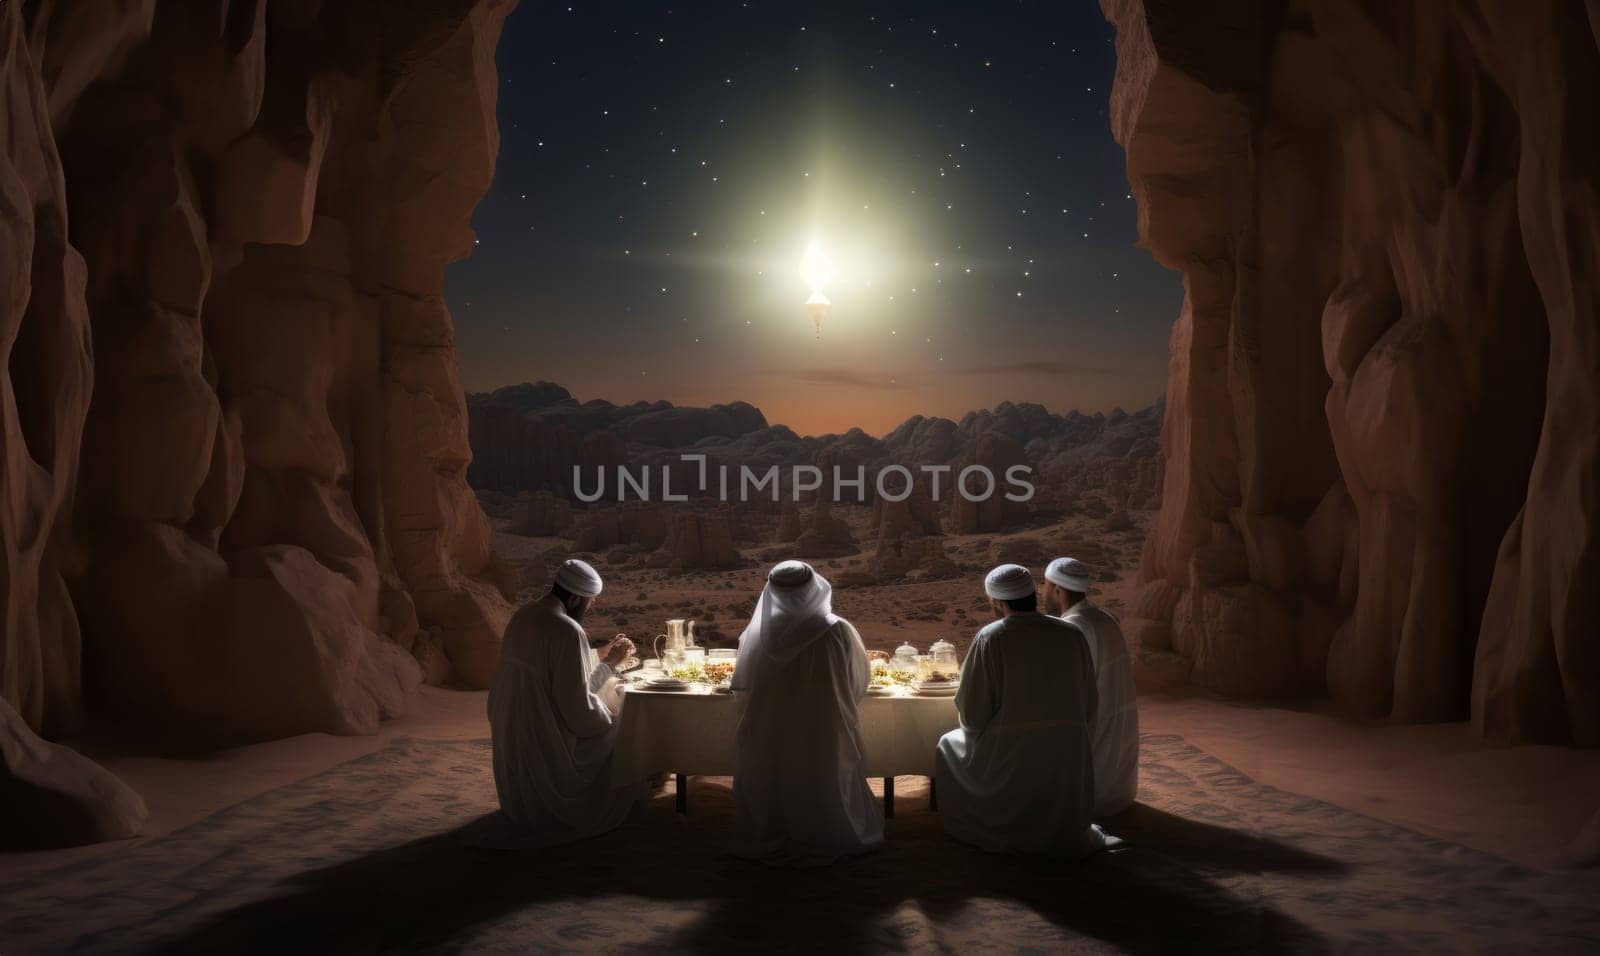 An Islamic family on Mars celebrates their first Ramadan, a historic moment of faith and hope. by dotshock